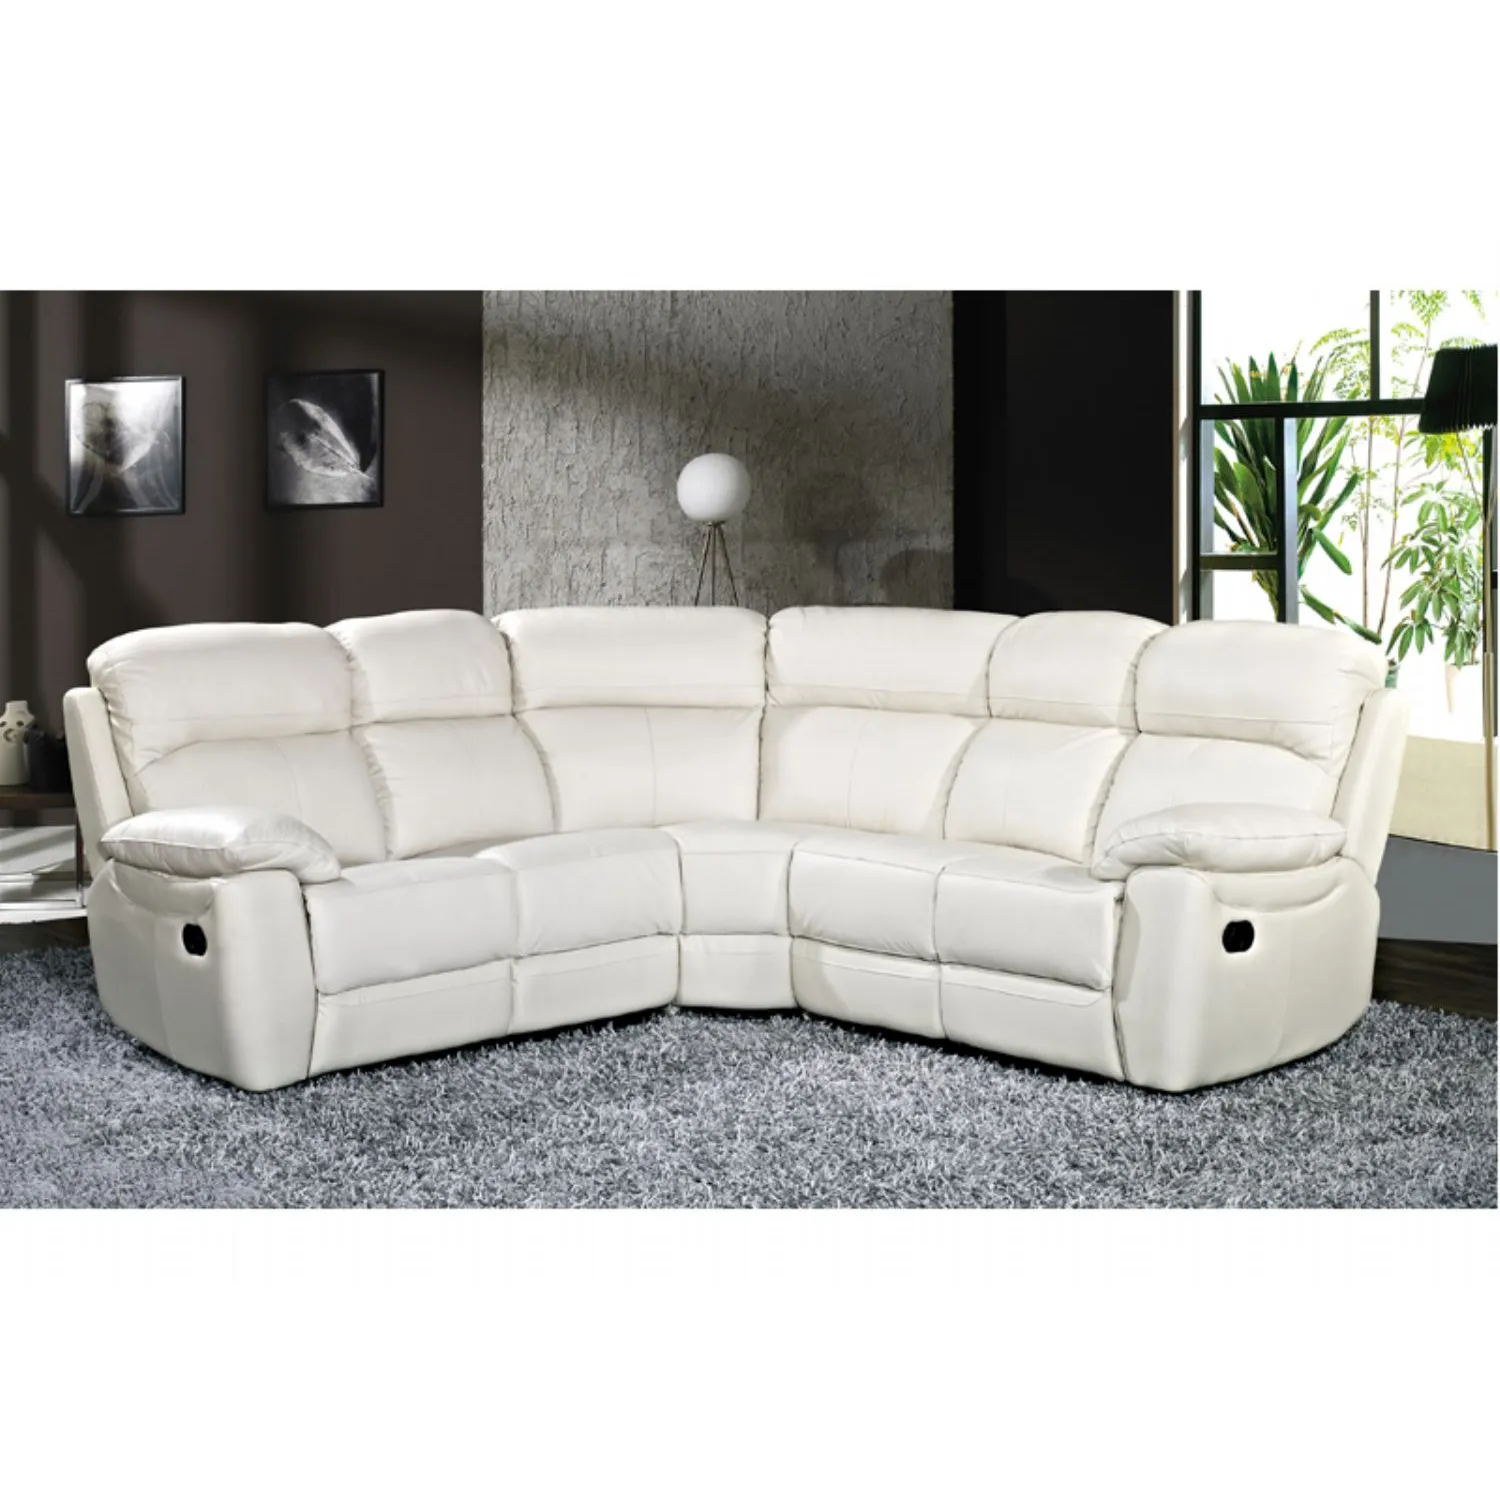 Ivory Leather Manual Recliner Corner Group Sofa